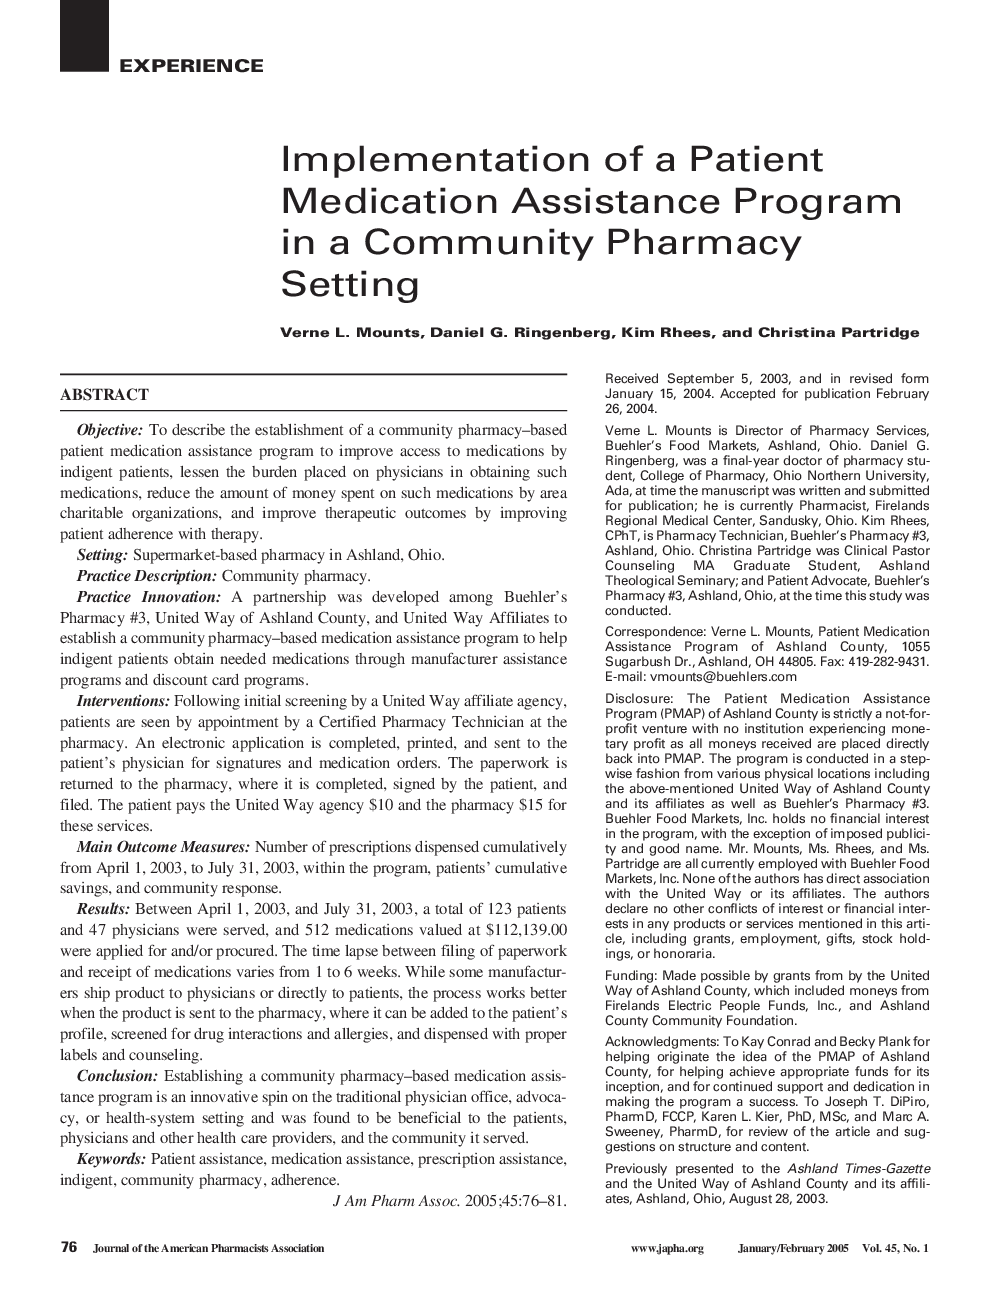 Implementation of a Patient Medication Assistance Program in a Community Pharmacy Setting